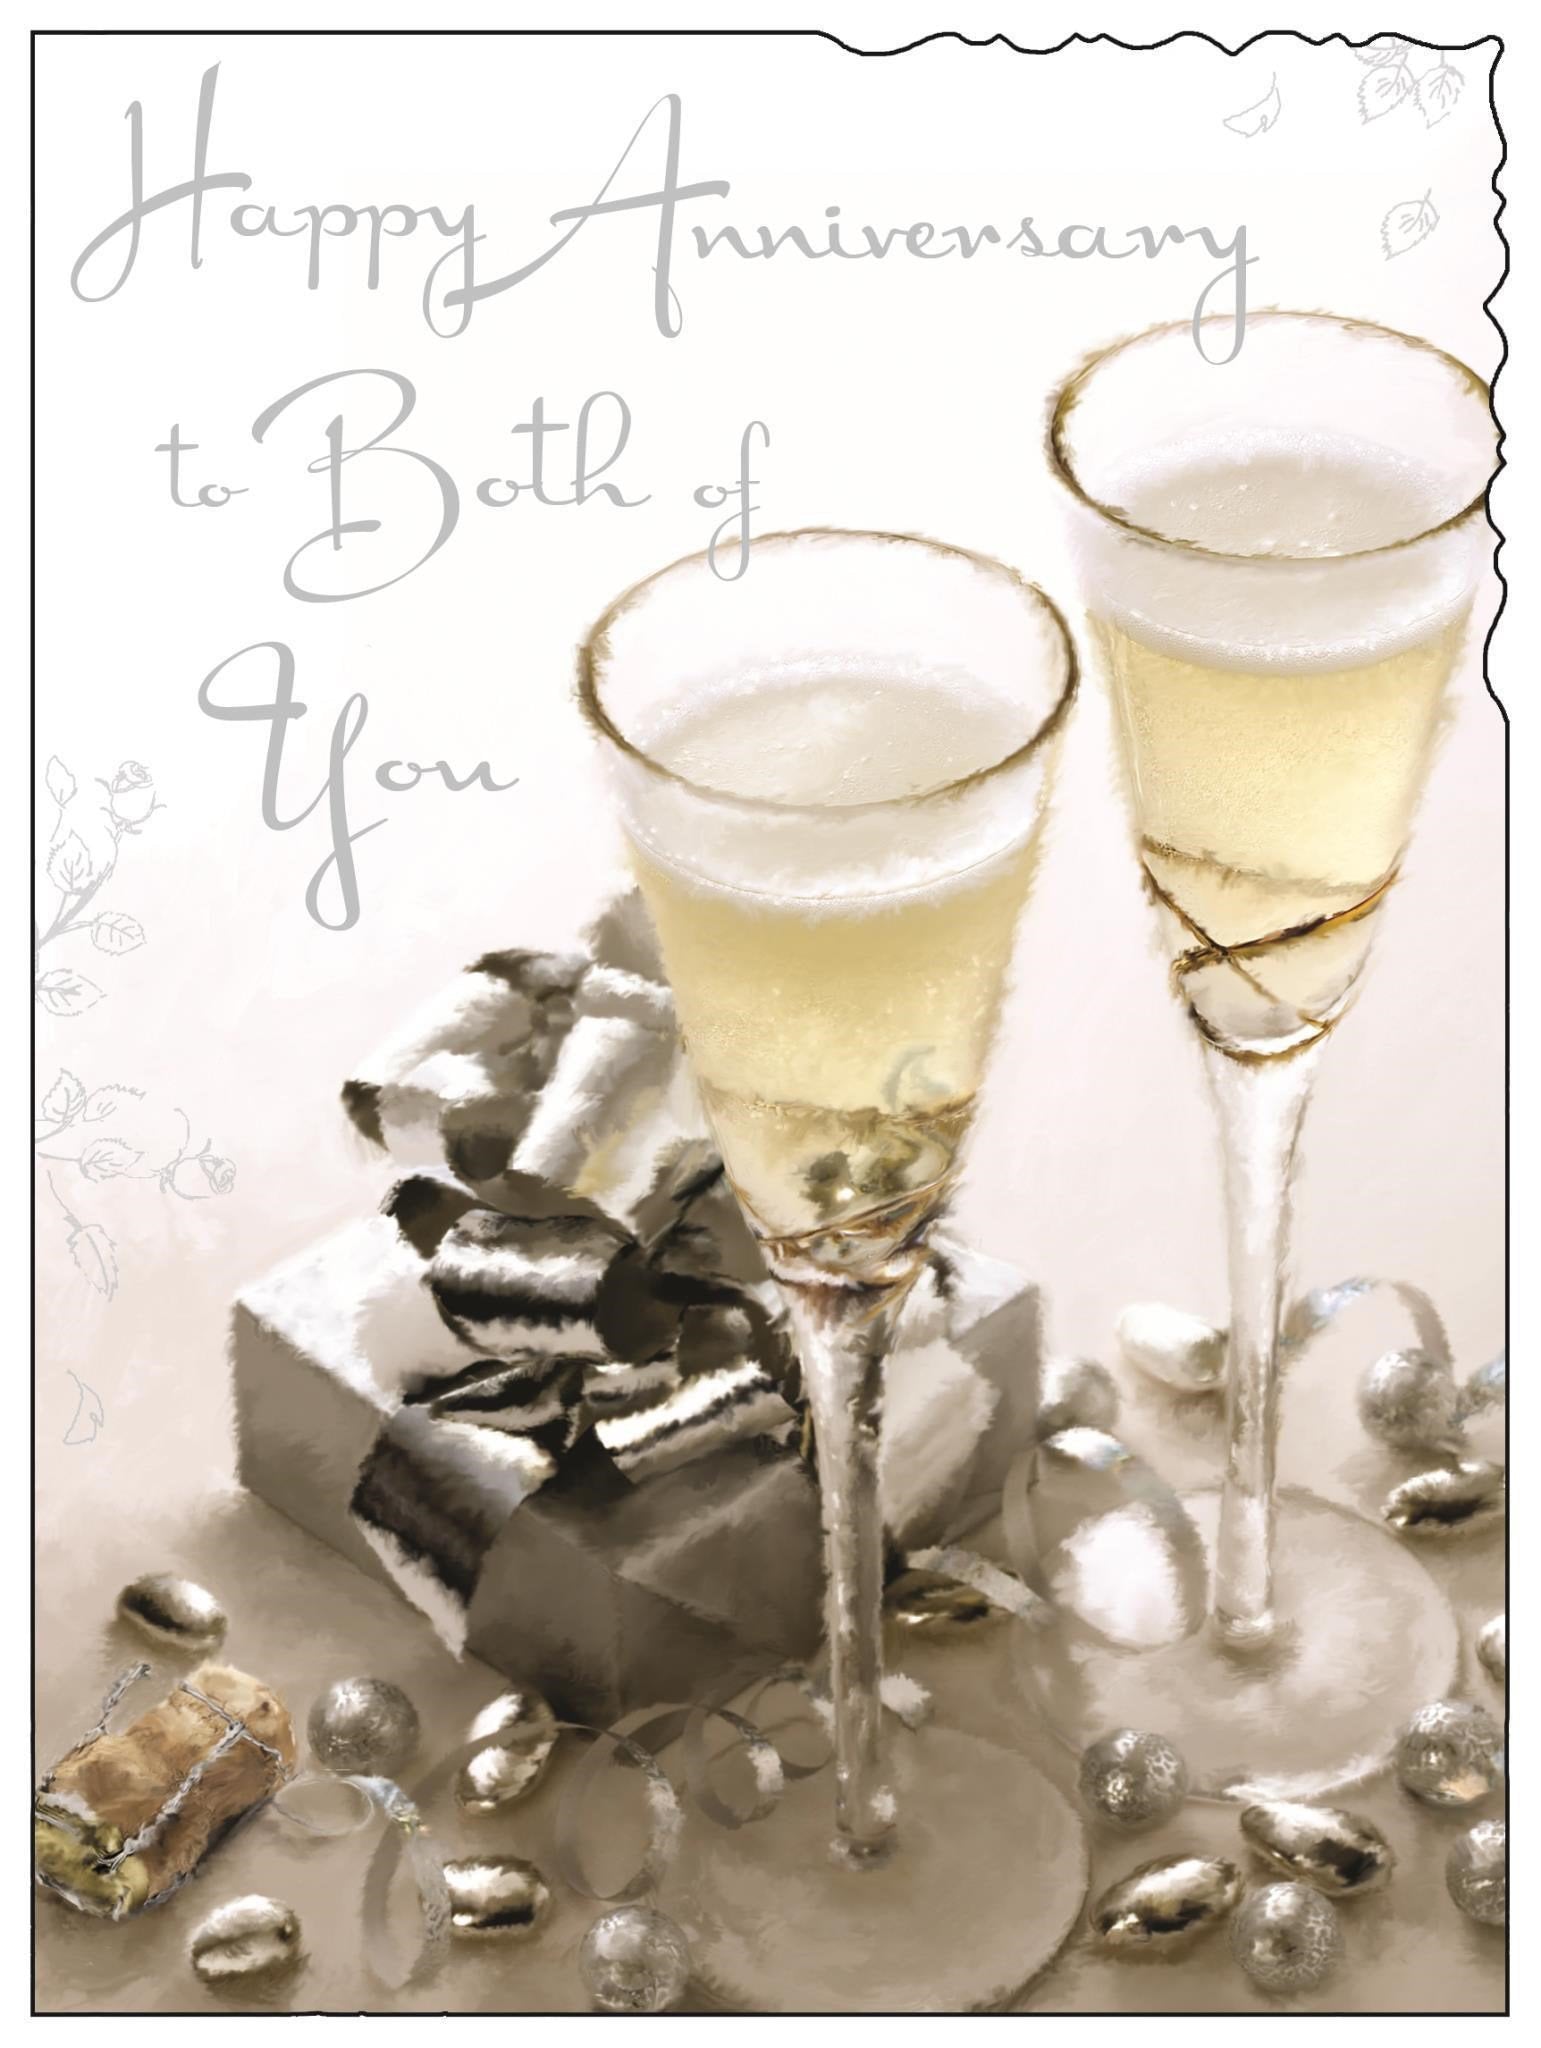 Front of Anniversary Both of You Glasses Greetings Card